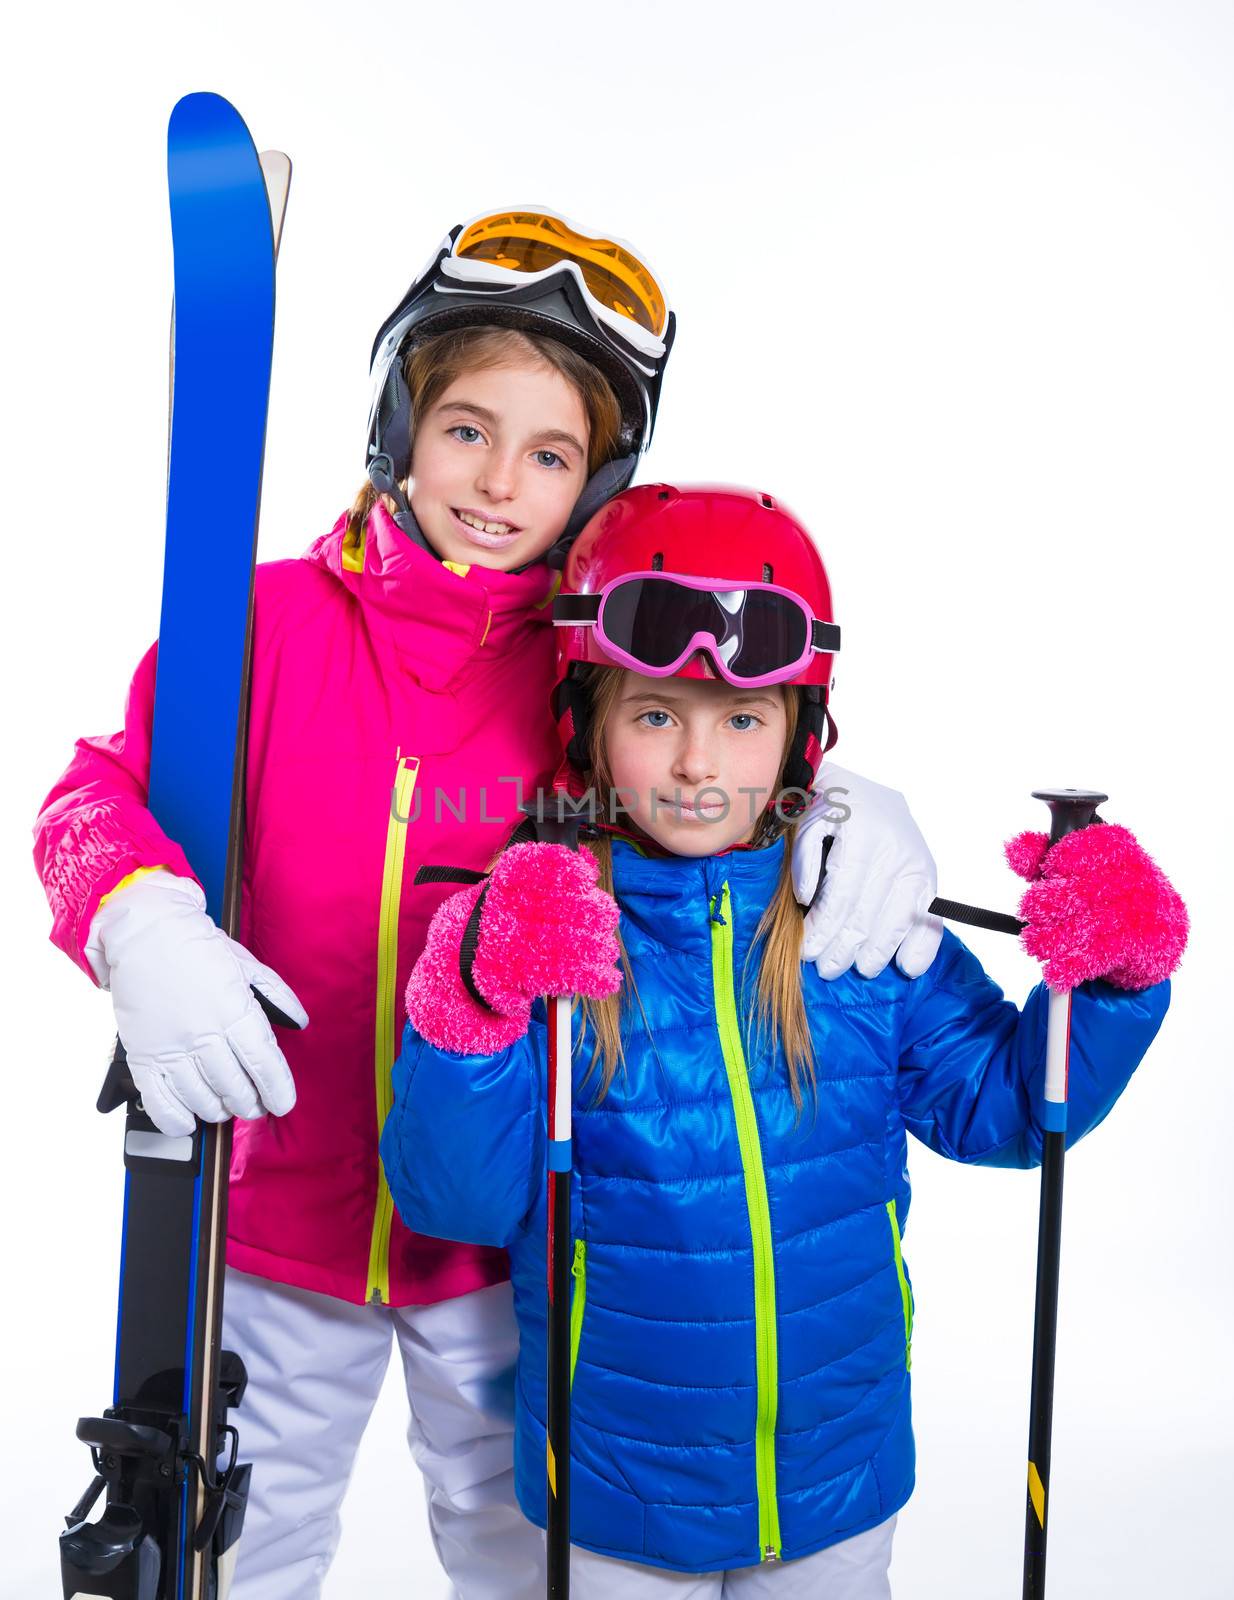 siters kid girls with ski poles helmet and snow goggles by lunamarina